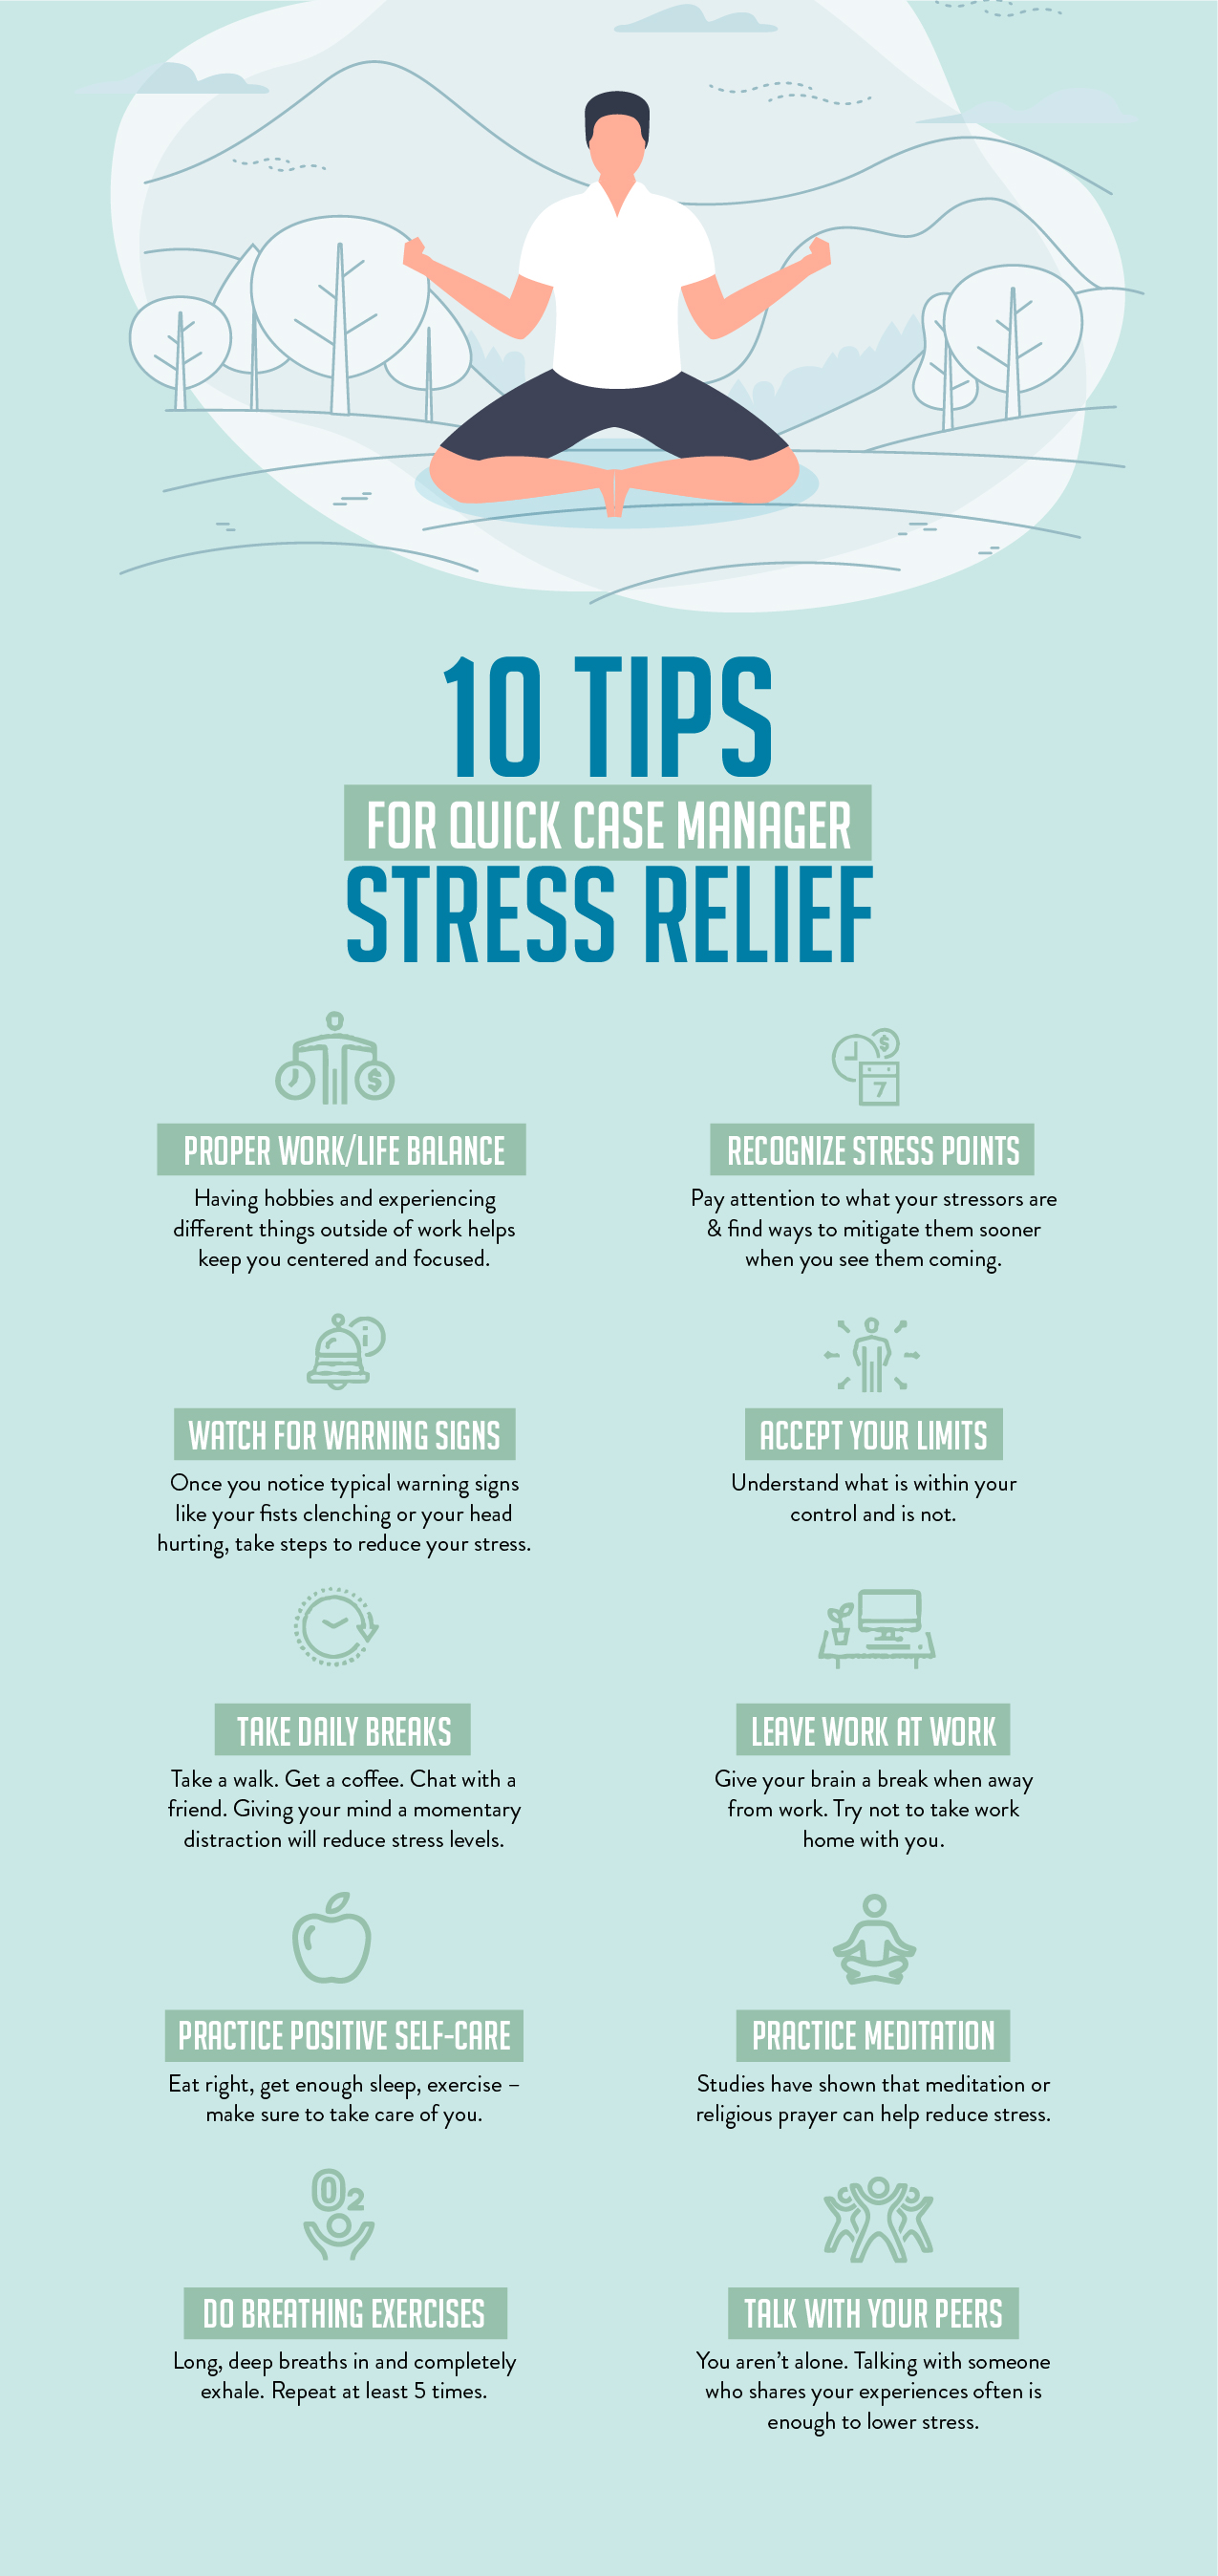 Strategies for Stress Relief